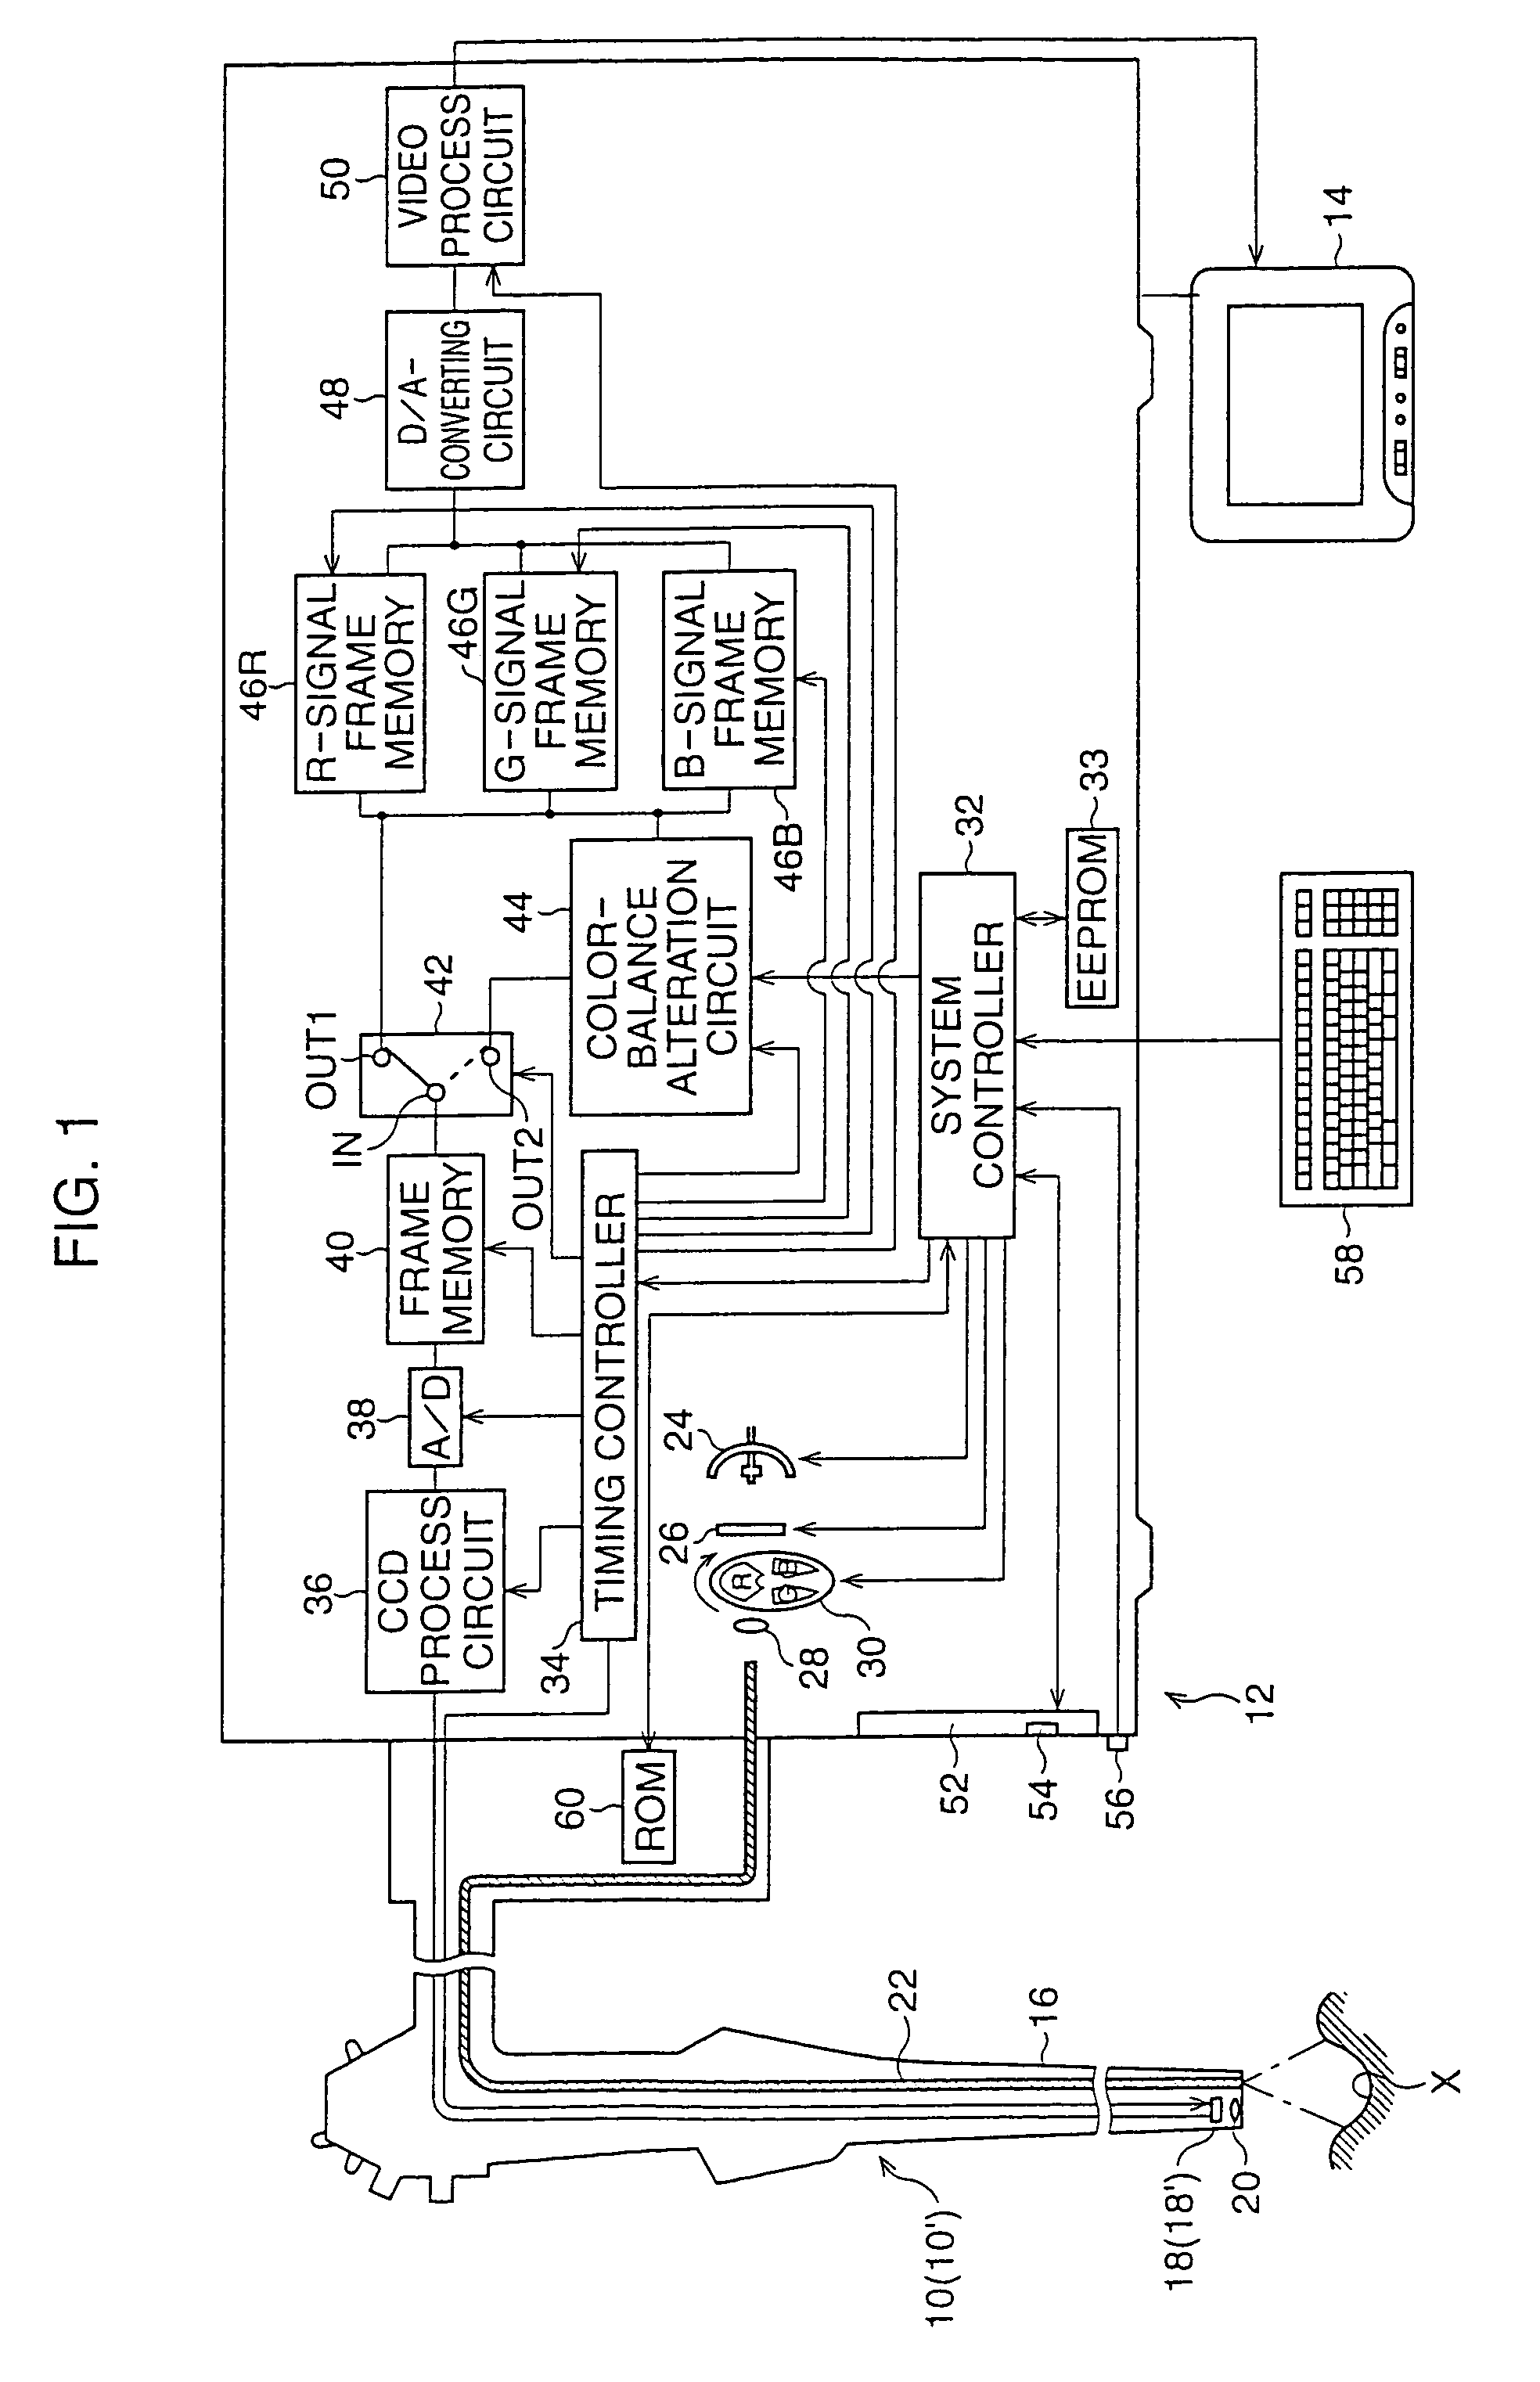 Electronic endoscope system with color-balance alteration process